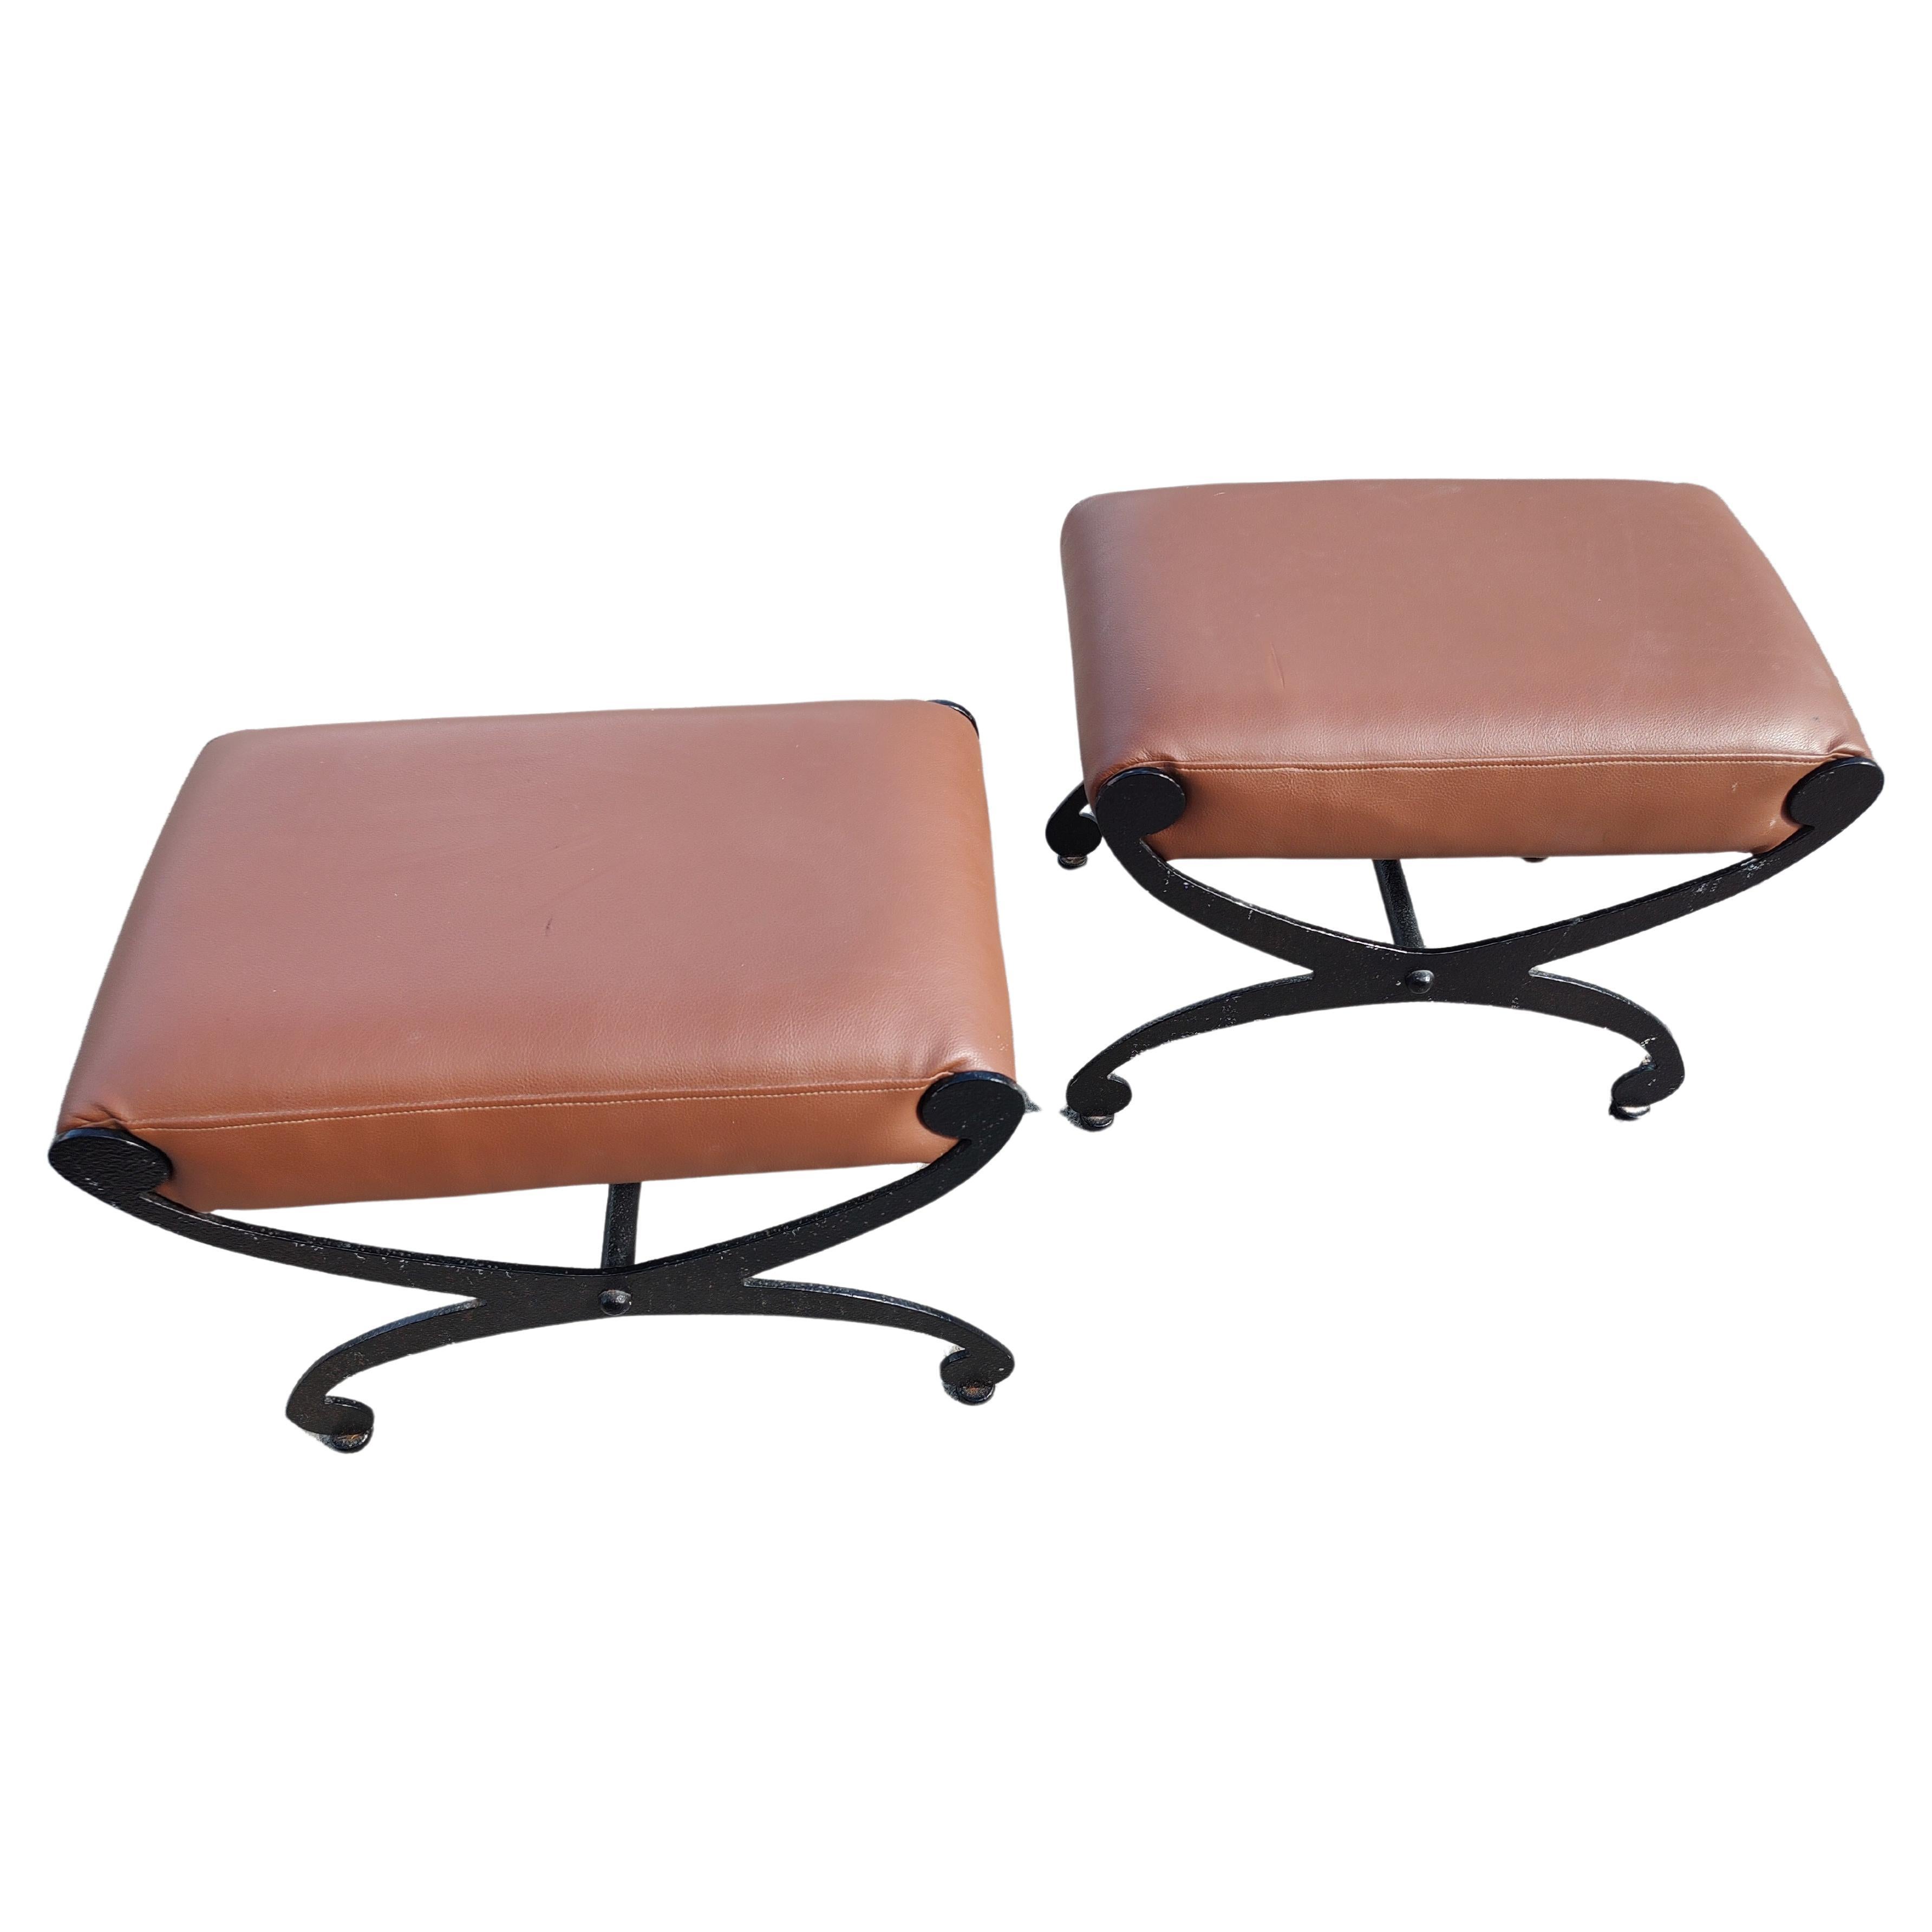 Fantastic pair of cast iron ottoman / footrests with tan brown Naughahyde. Curved X form with dimples in the iron that are currently painted black which can easily be repainted. In excellent vintage condition with a impression on the top of one the